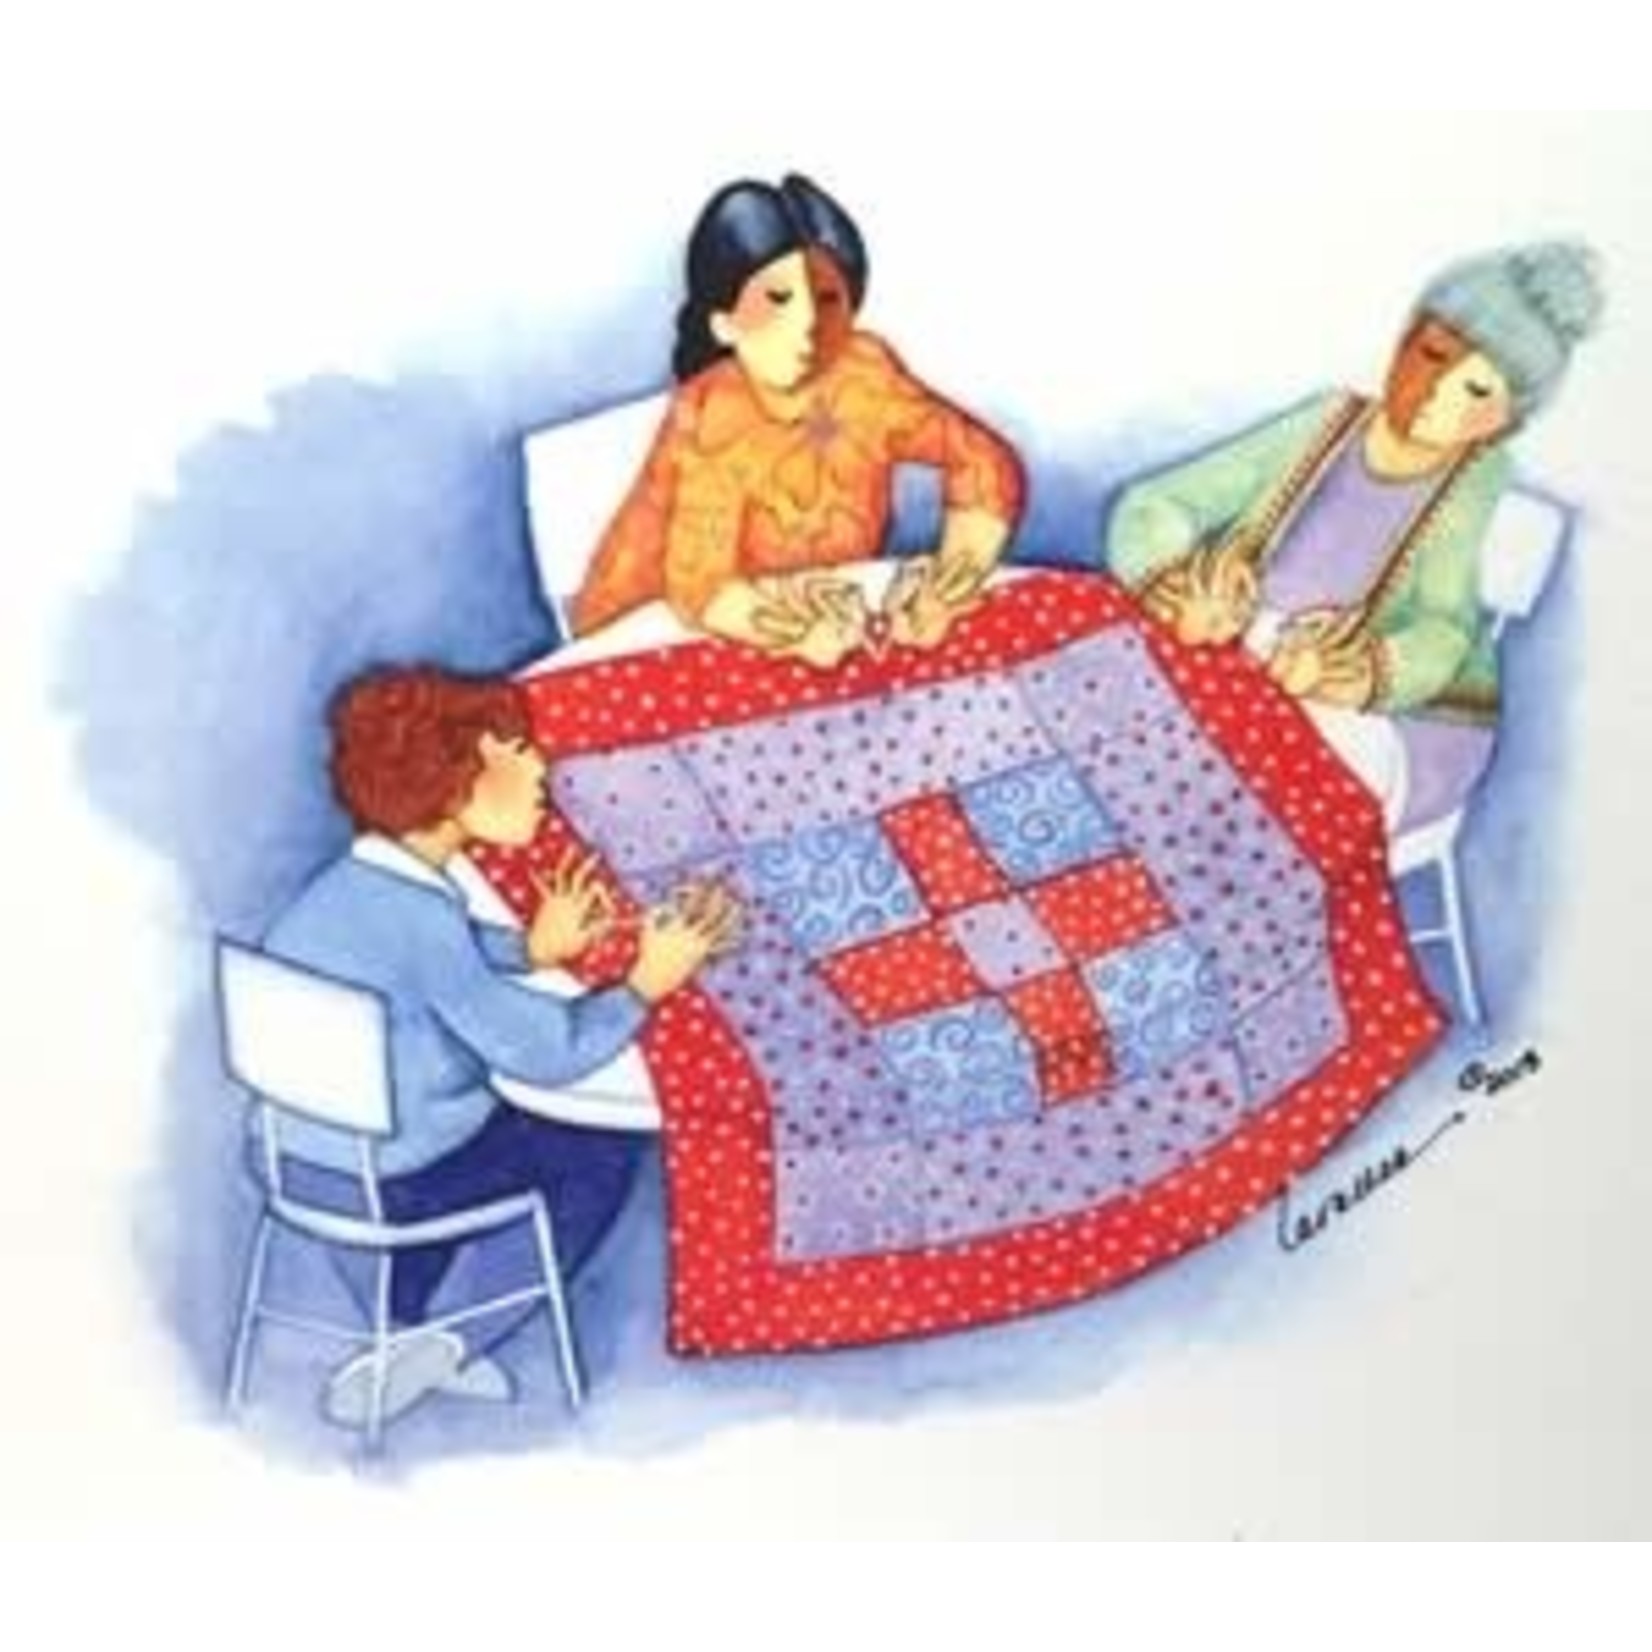 Barbara Lavallee Tying a Quilt | Barbara Lavallee